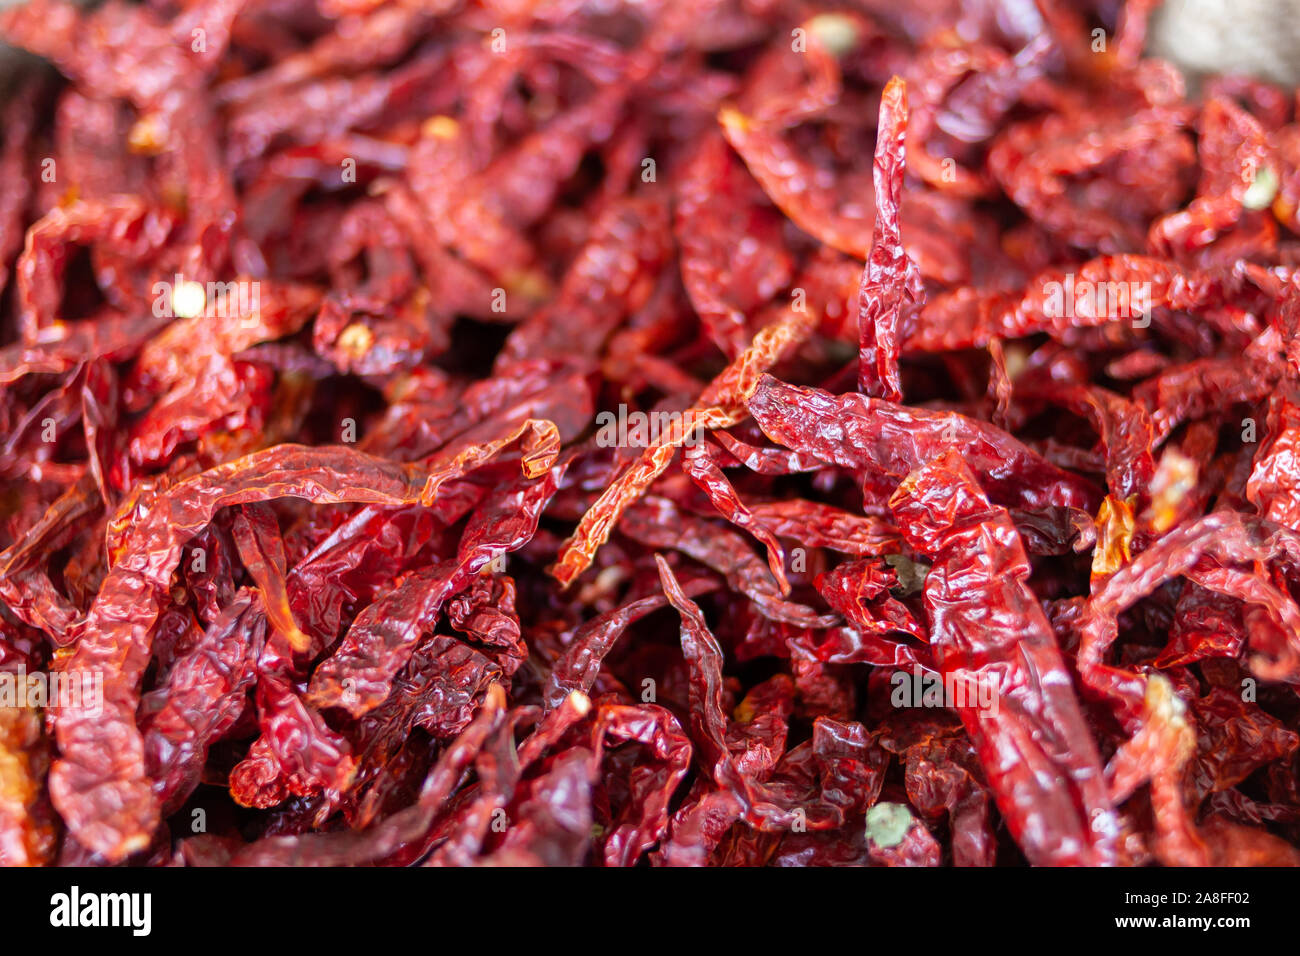 Dried red chillies for hot and spicy meals. Typical for asian markets where they are found in large quantities. Stock Photo